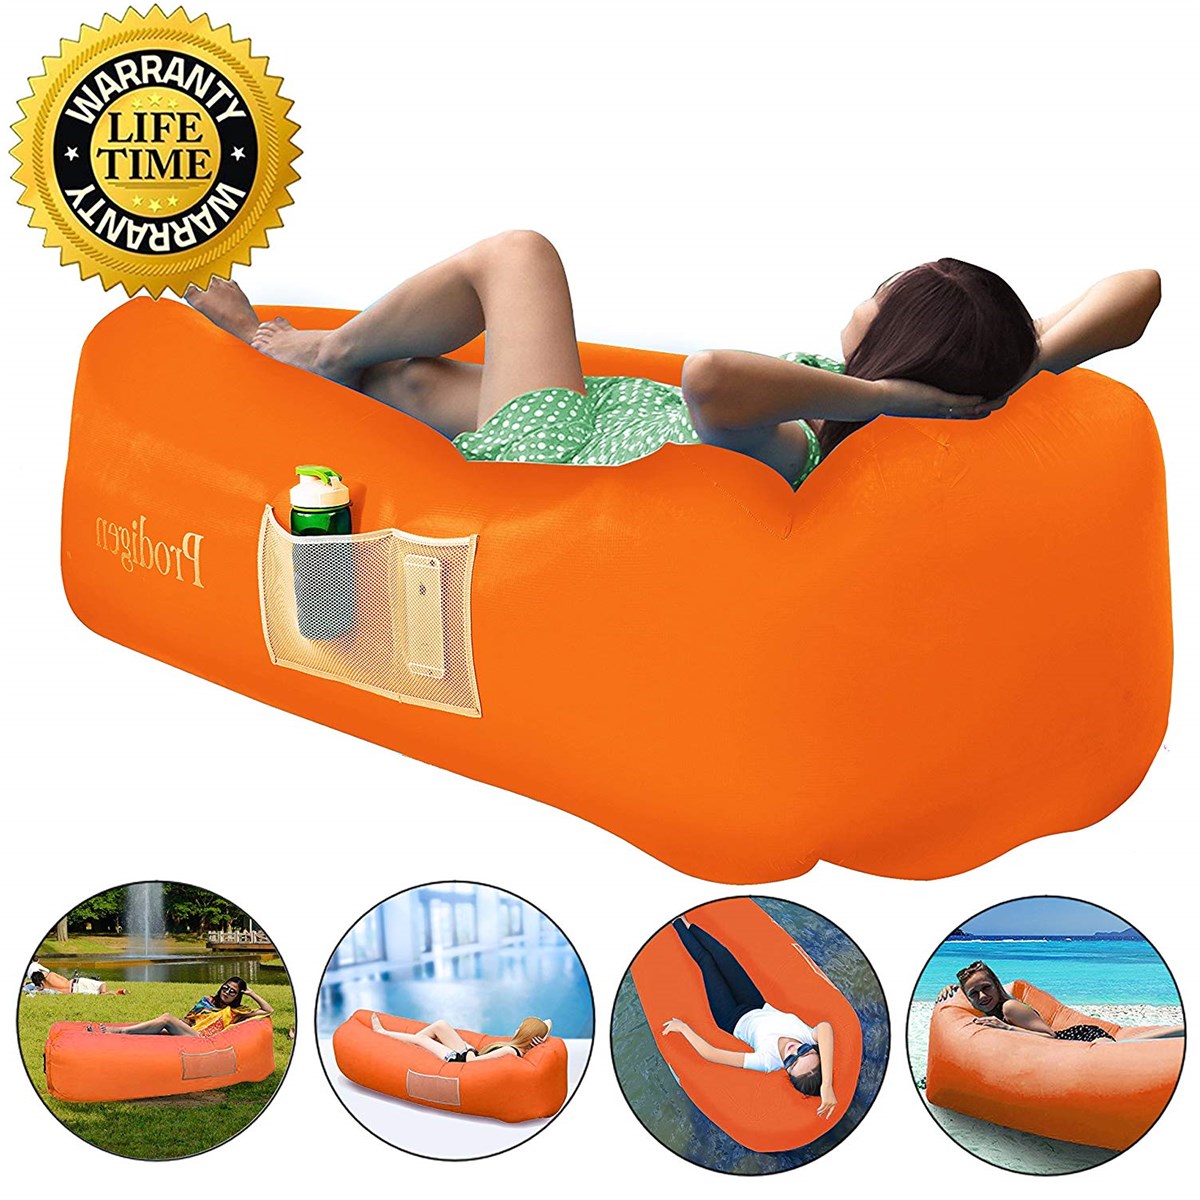 New style Poratable waterproof Lounger Air Sofa for camping